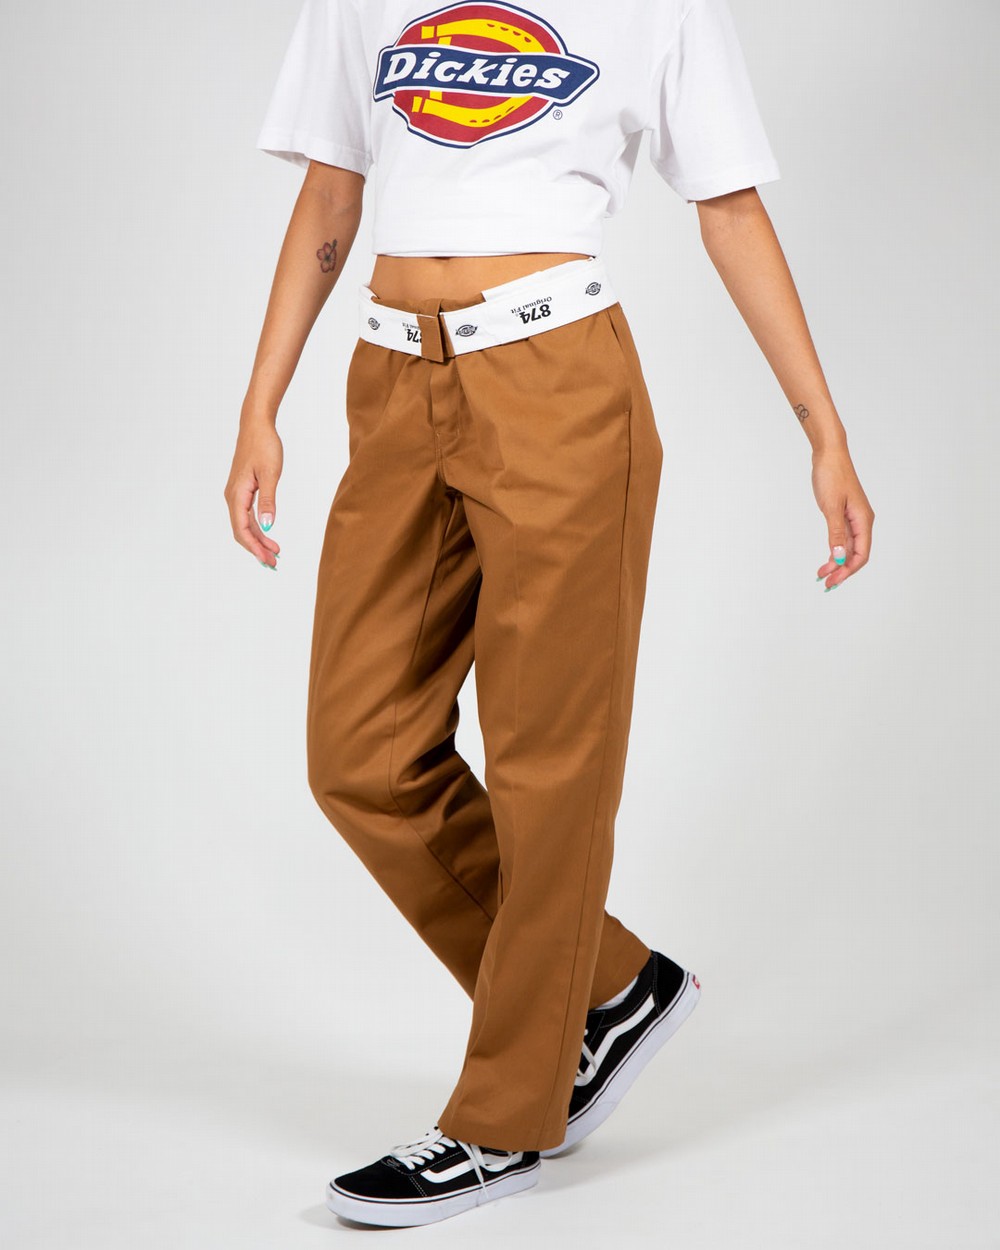 COMPLETE Guide To Dickies Work Pants  Which Fit Is Best 874 873  Double Knee Cargo Skinny  YouTube